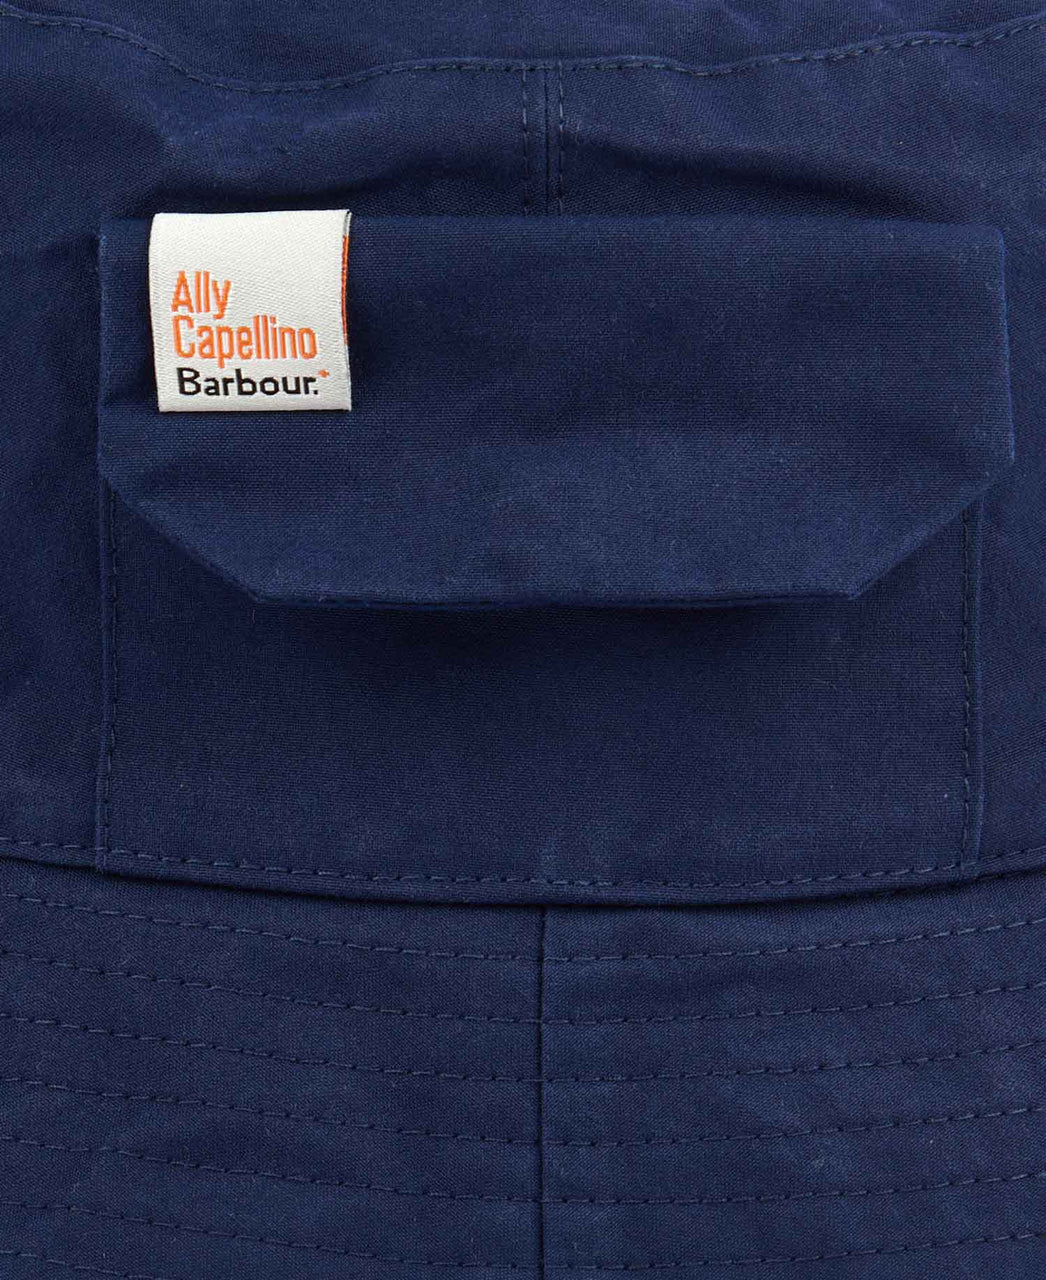 Ally Capellino x Barbour Sweep Waxed Cotton Sports Hat in Navy